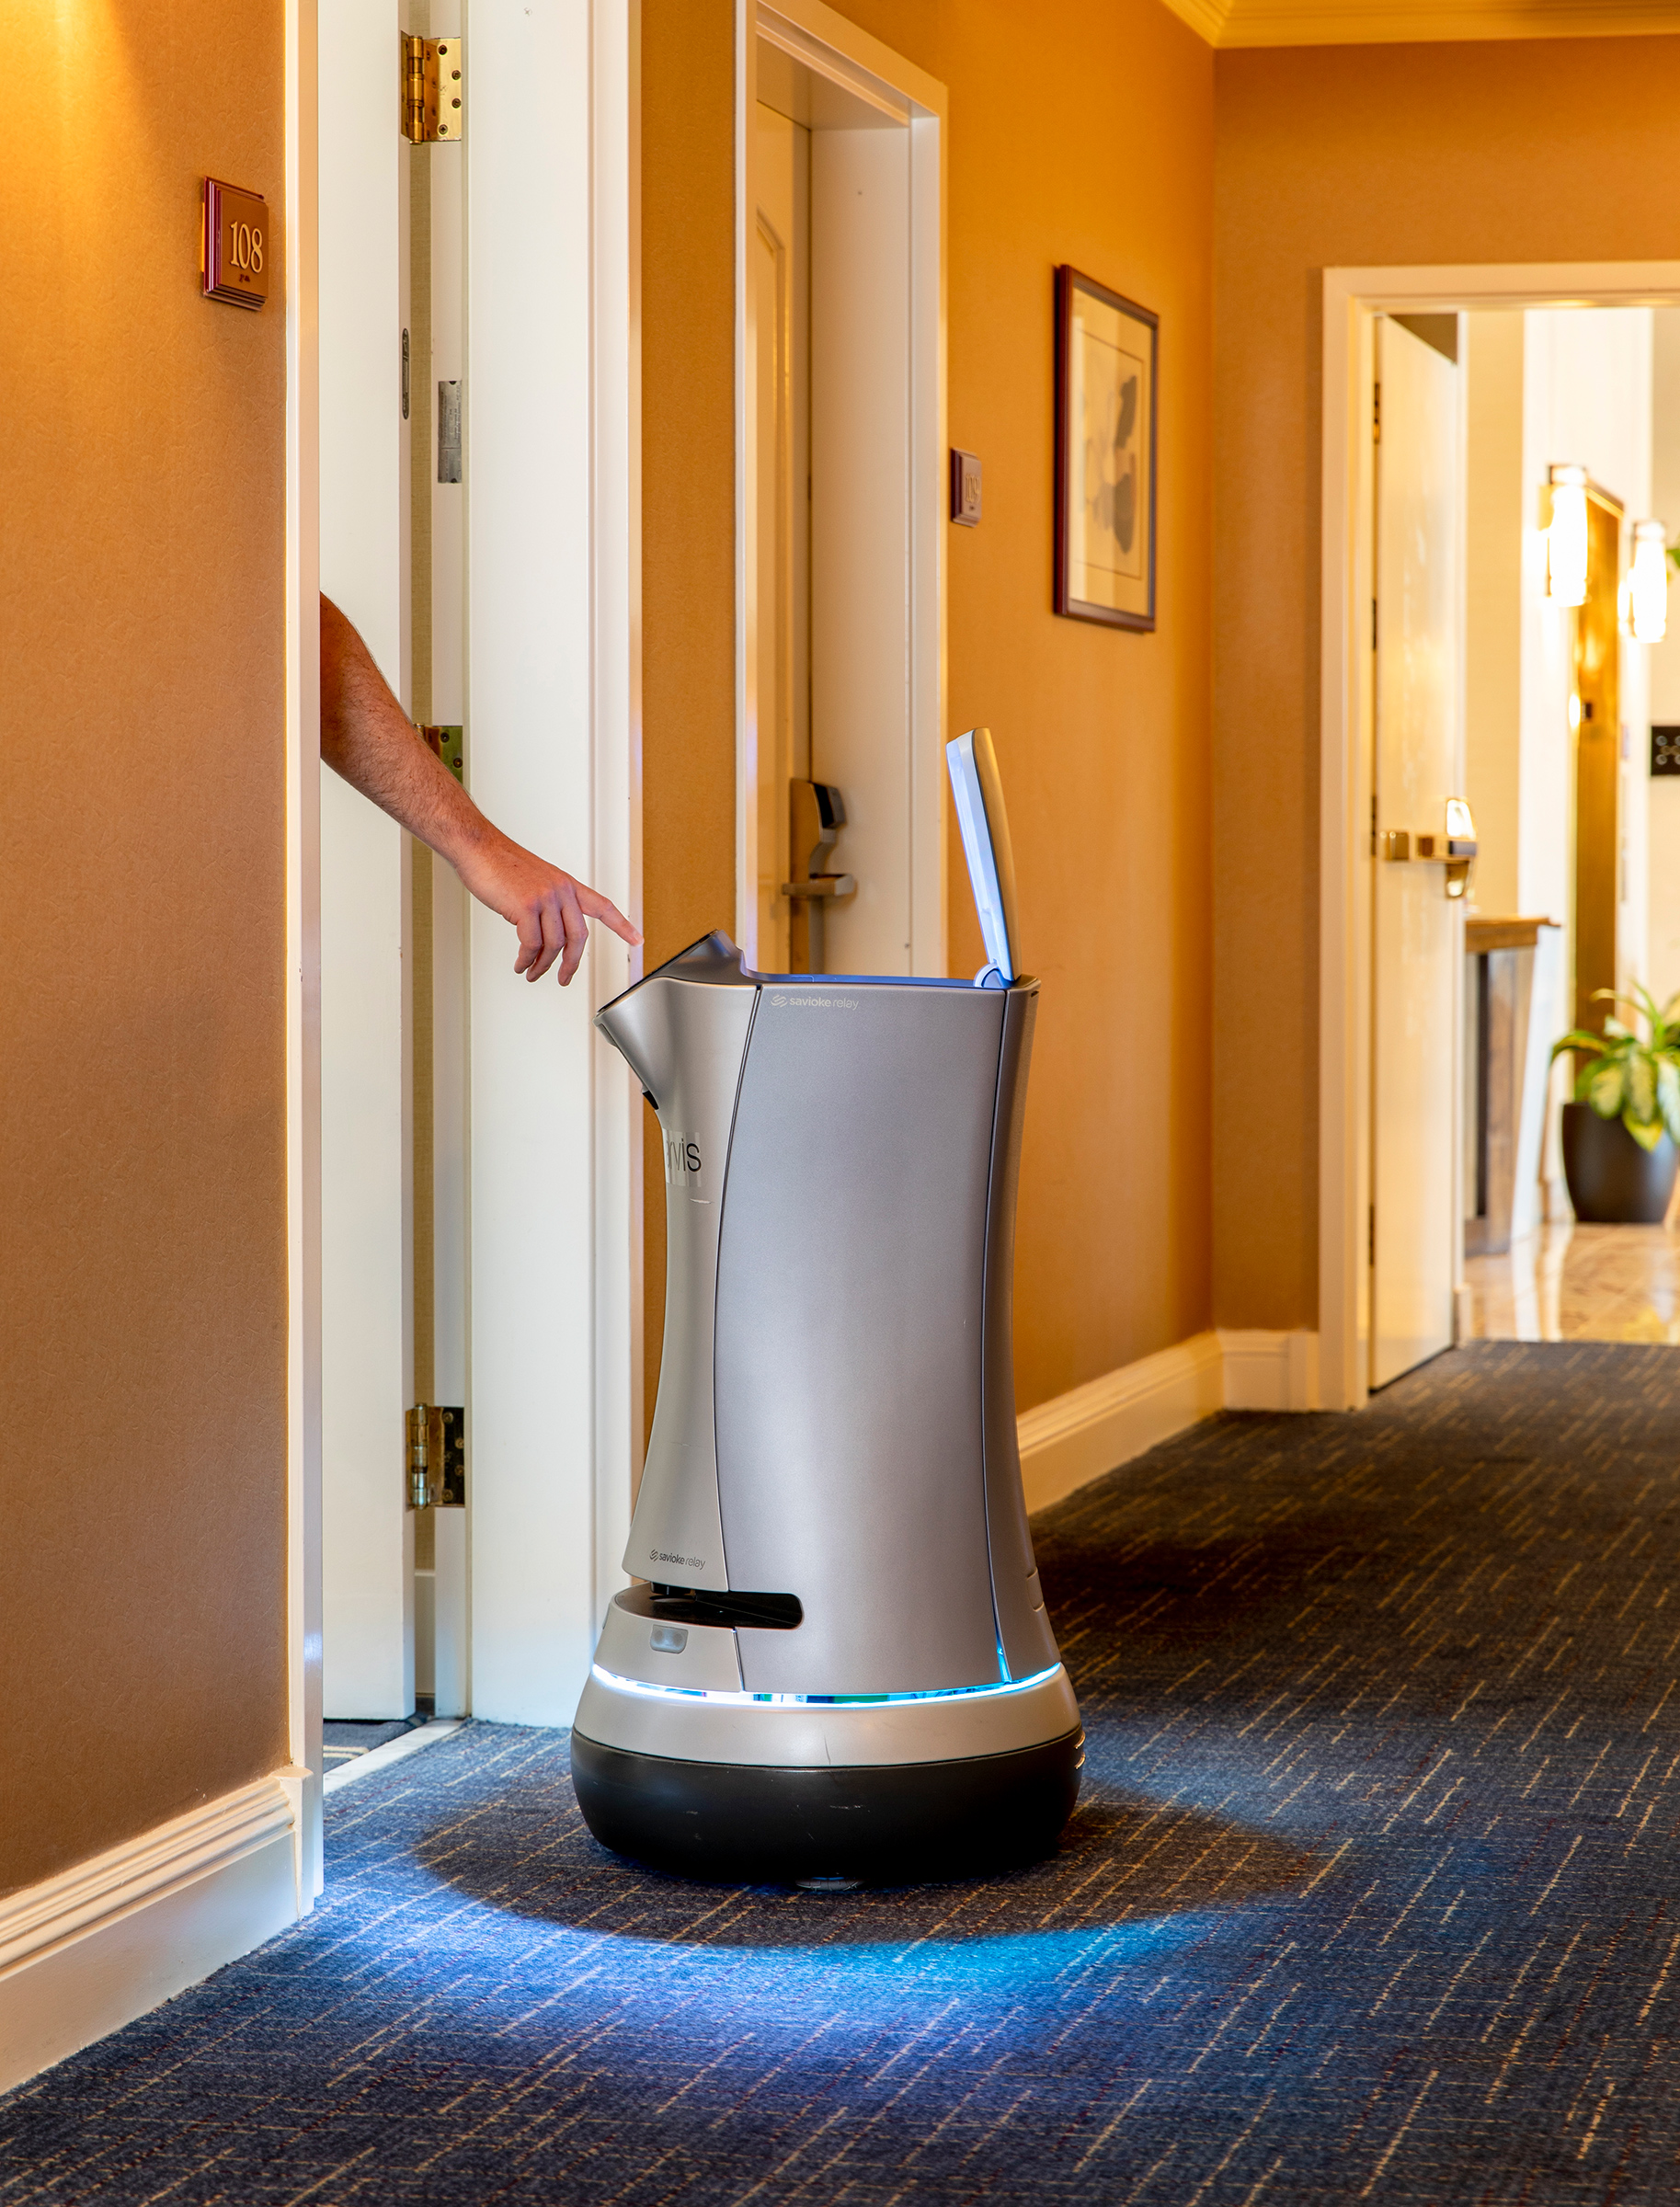 Jarvis the robotic butler on duty at the Grand Hotel in Sunnyvale, Calif., on July 30 (Cayce Clifford for TIME)